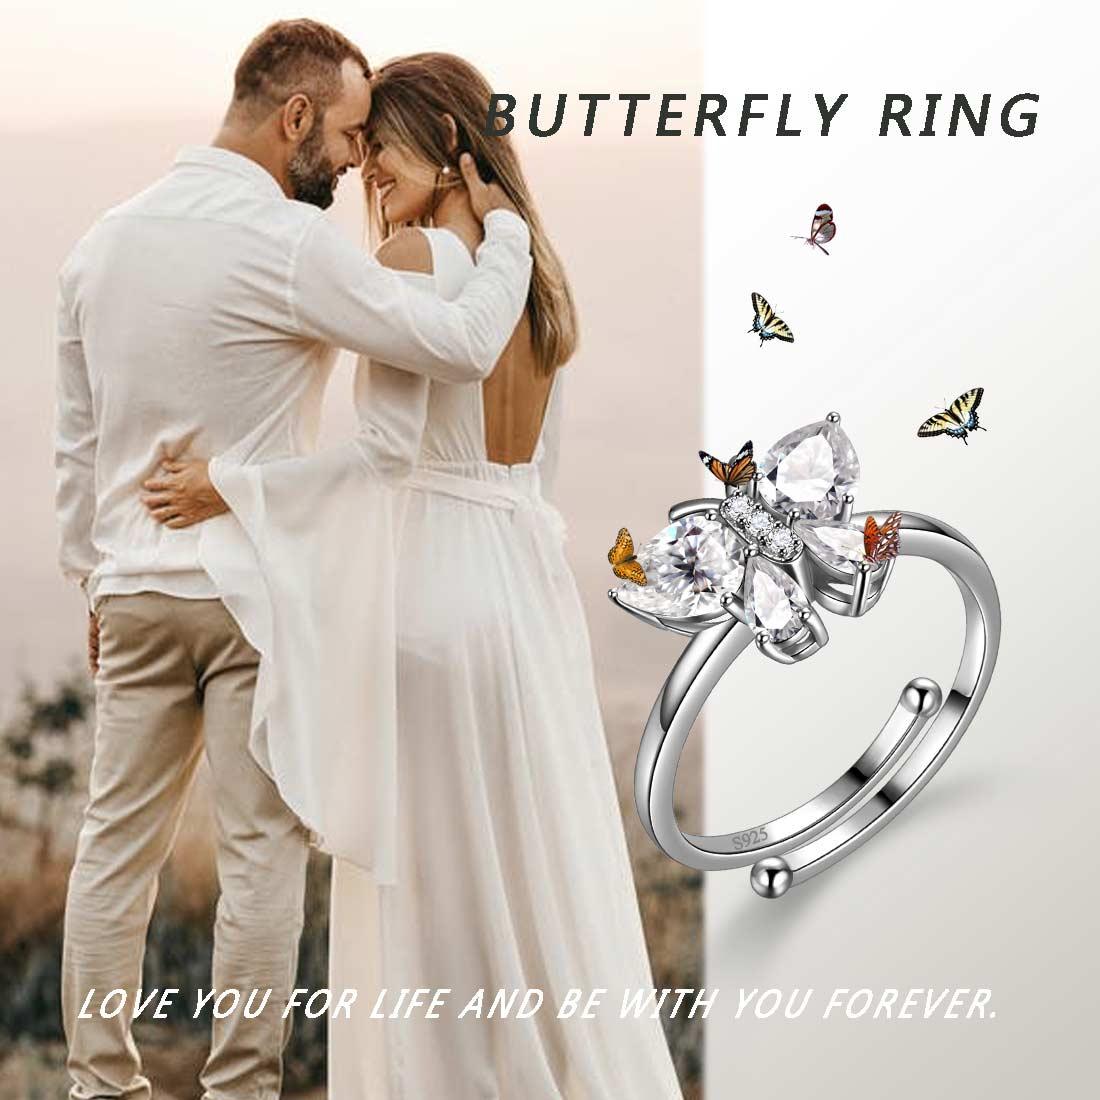 Butterfly Ring Band Birthstone April Diamond Adjustable - Rings - Aurora Tears